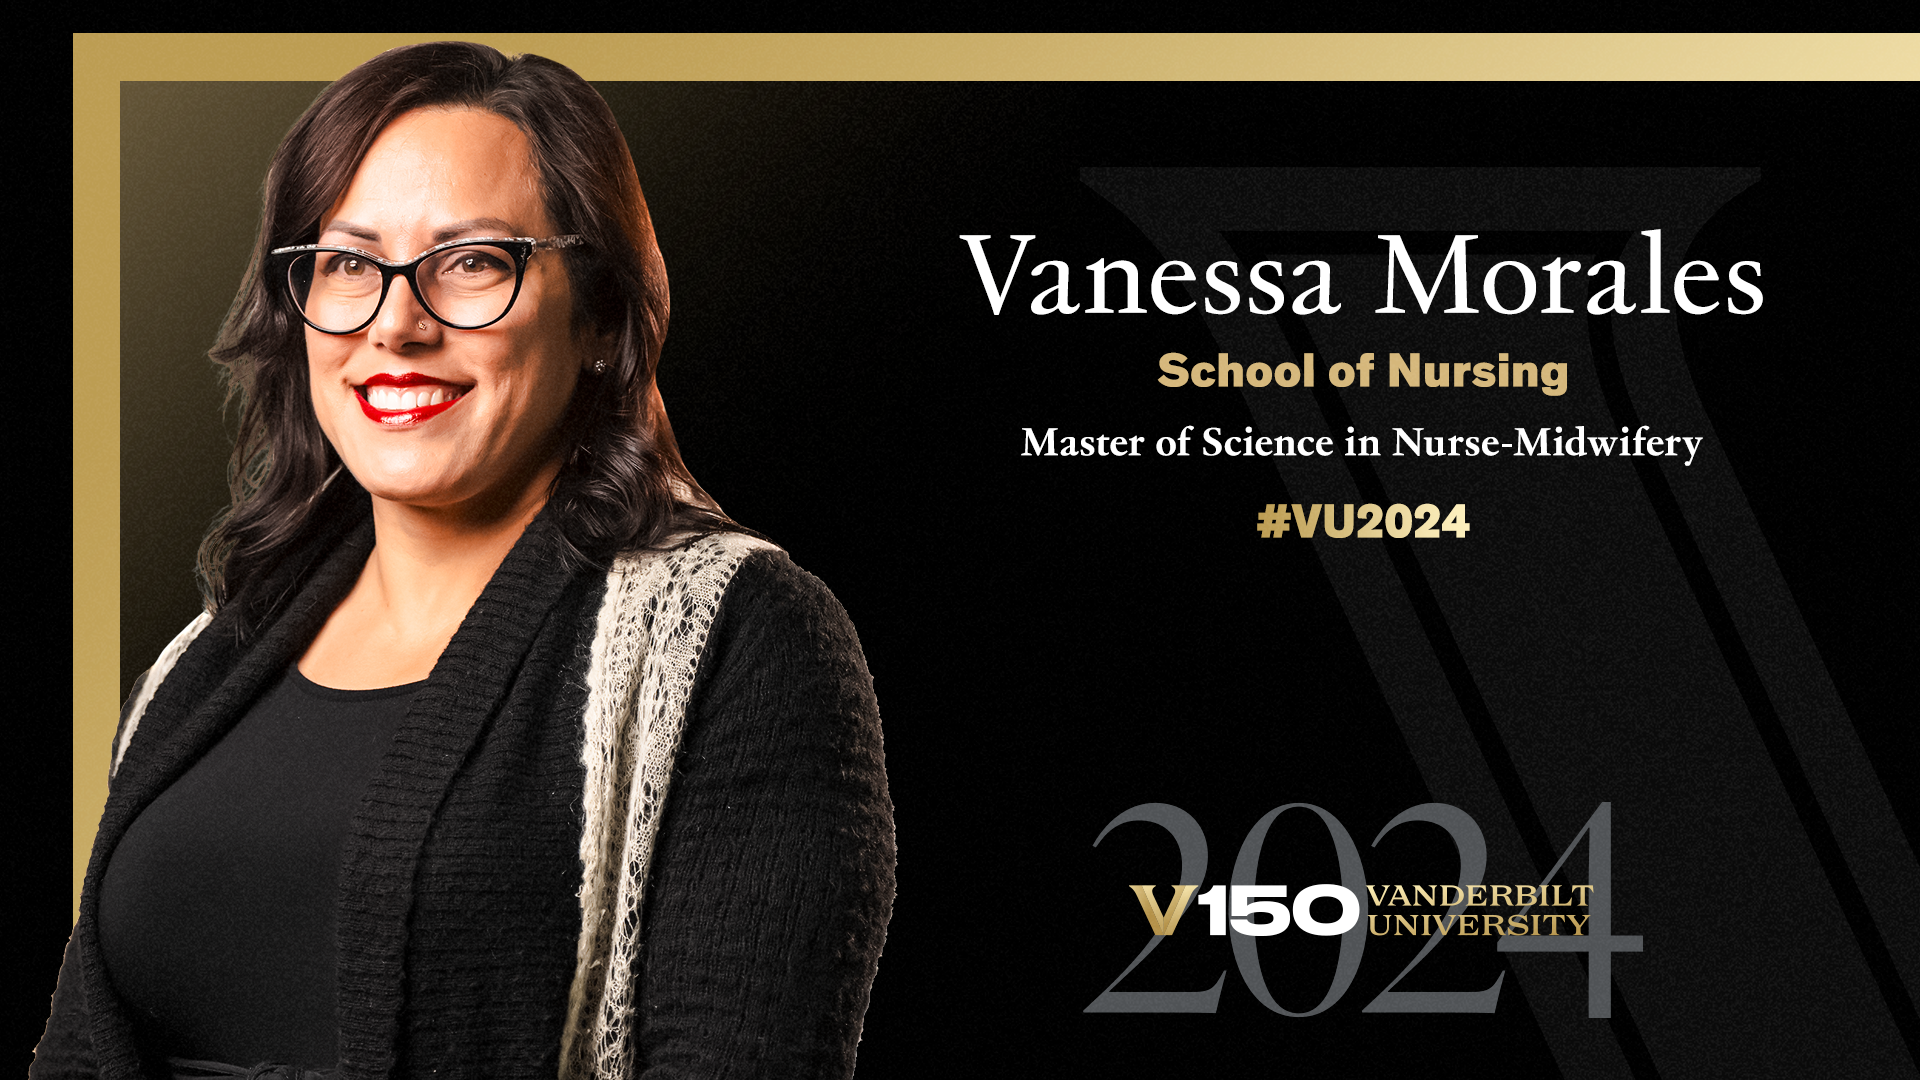 CLASS OF 2024: Hope through heartbreak fuels Vanessa Morales’ mission to help  expecting mothers